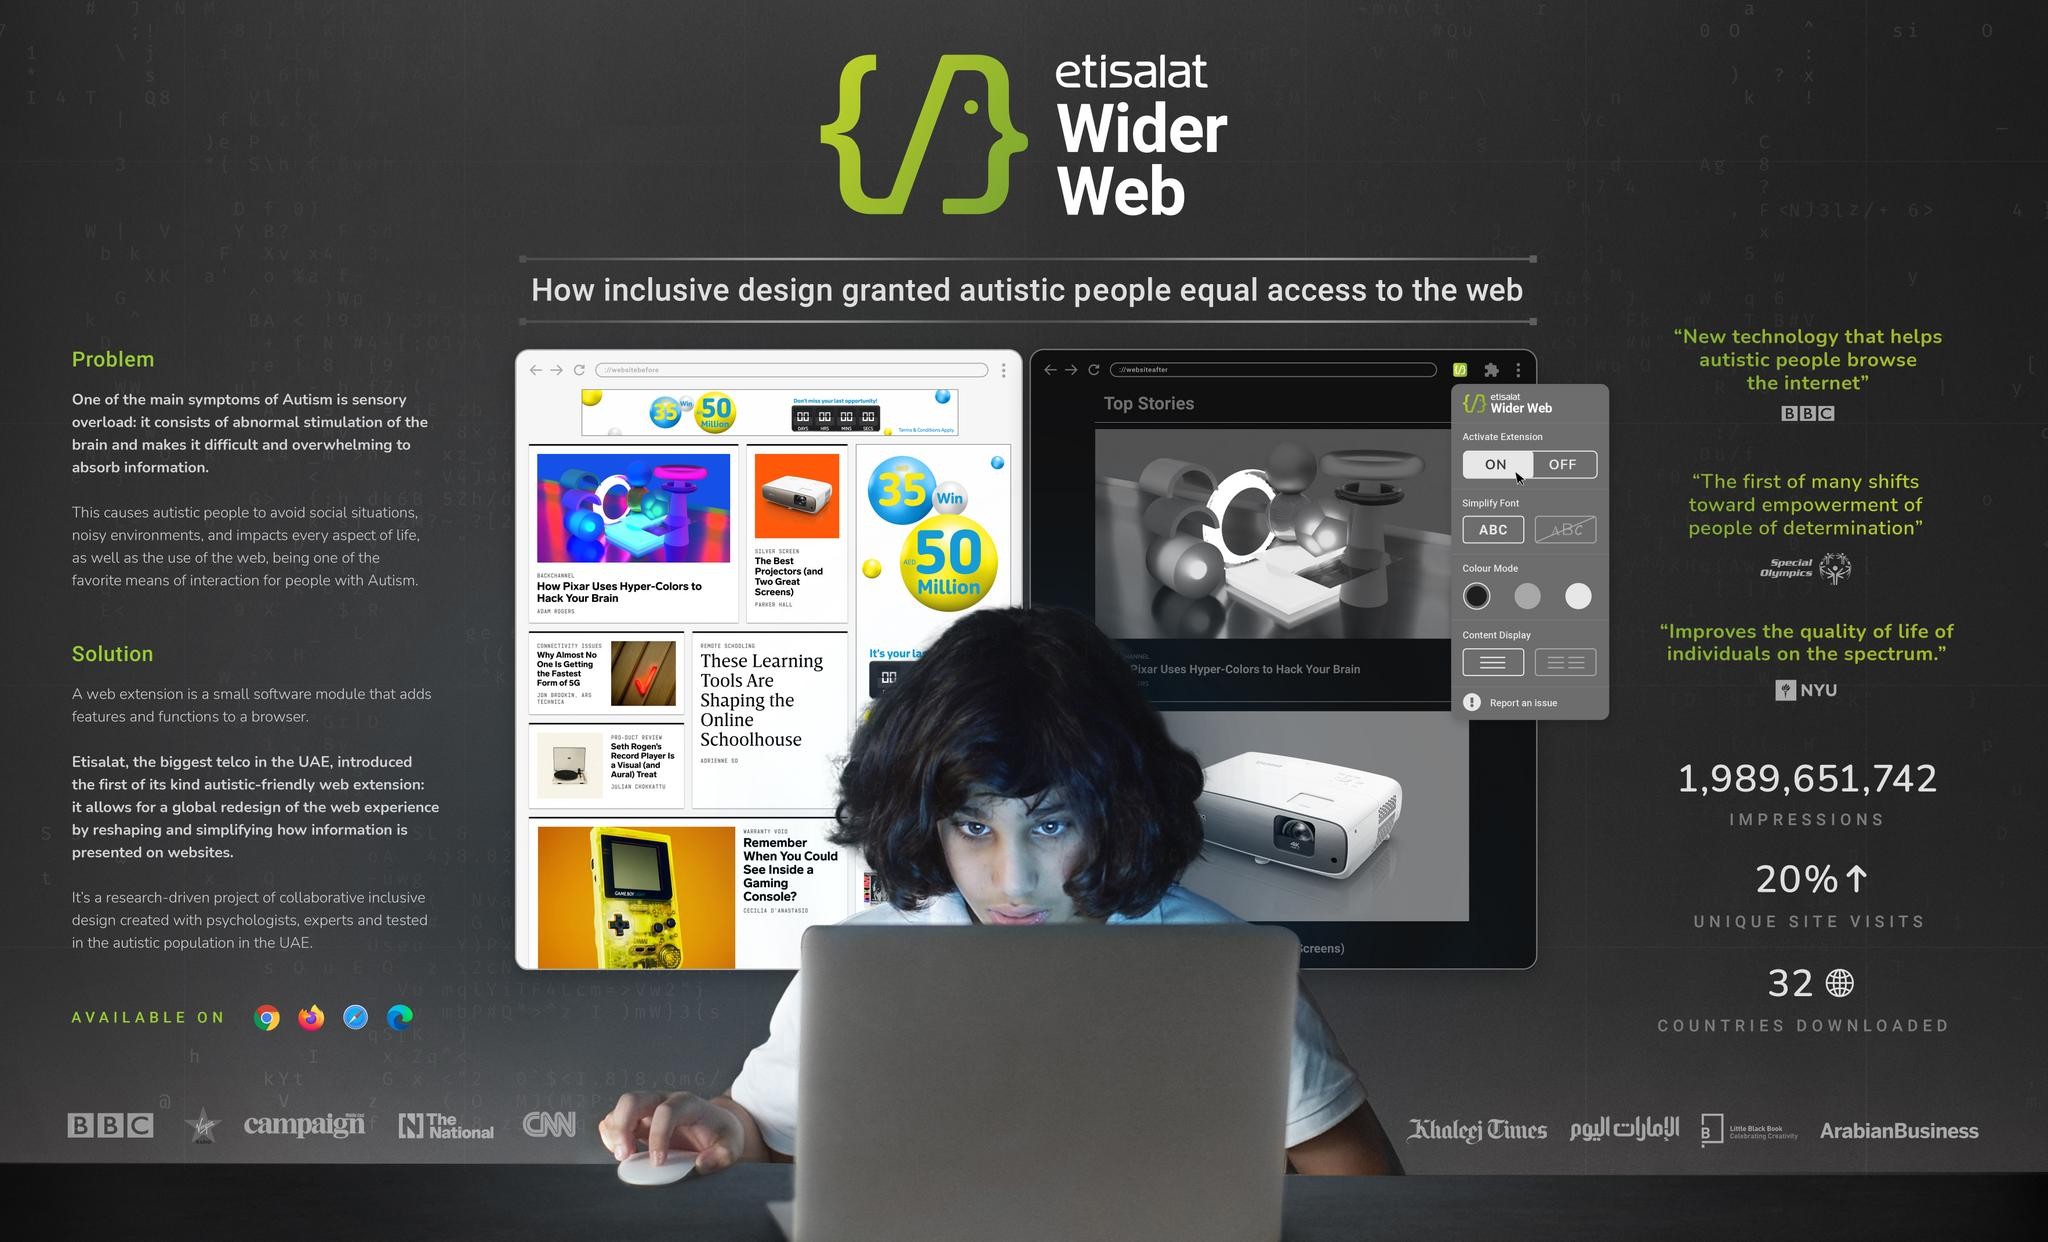 The Wider Web